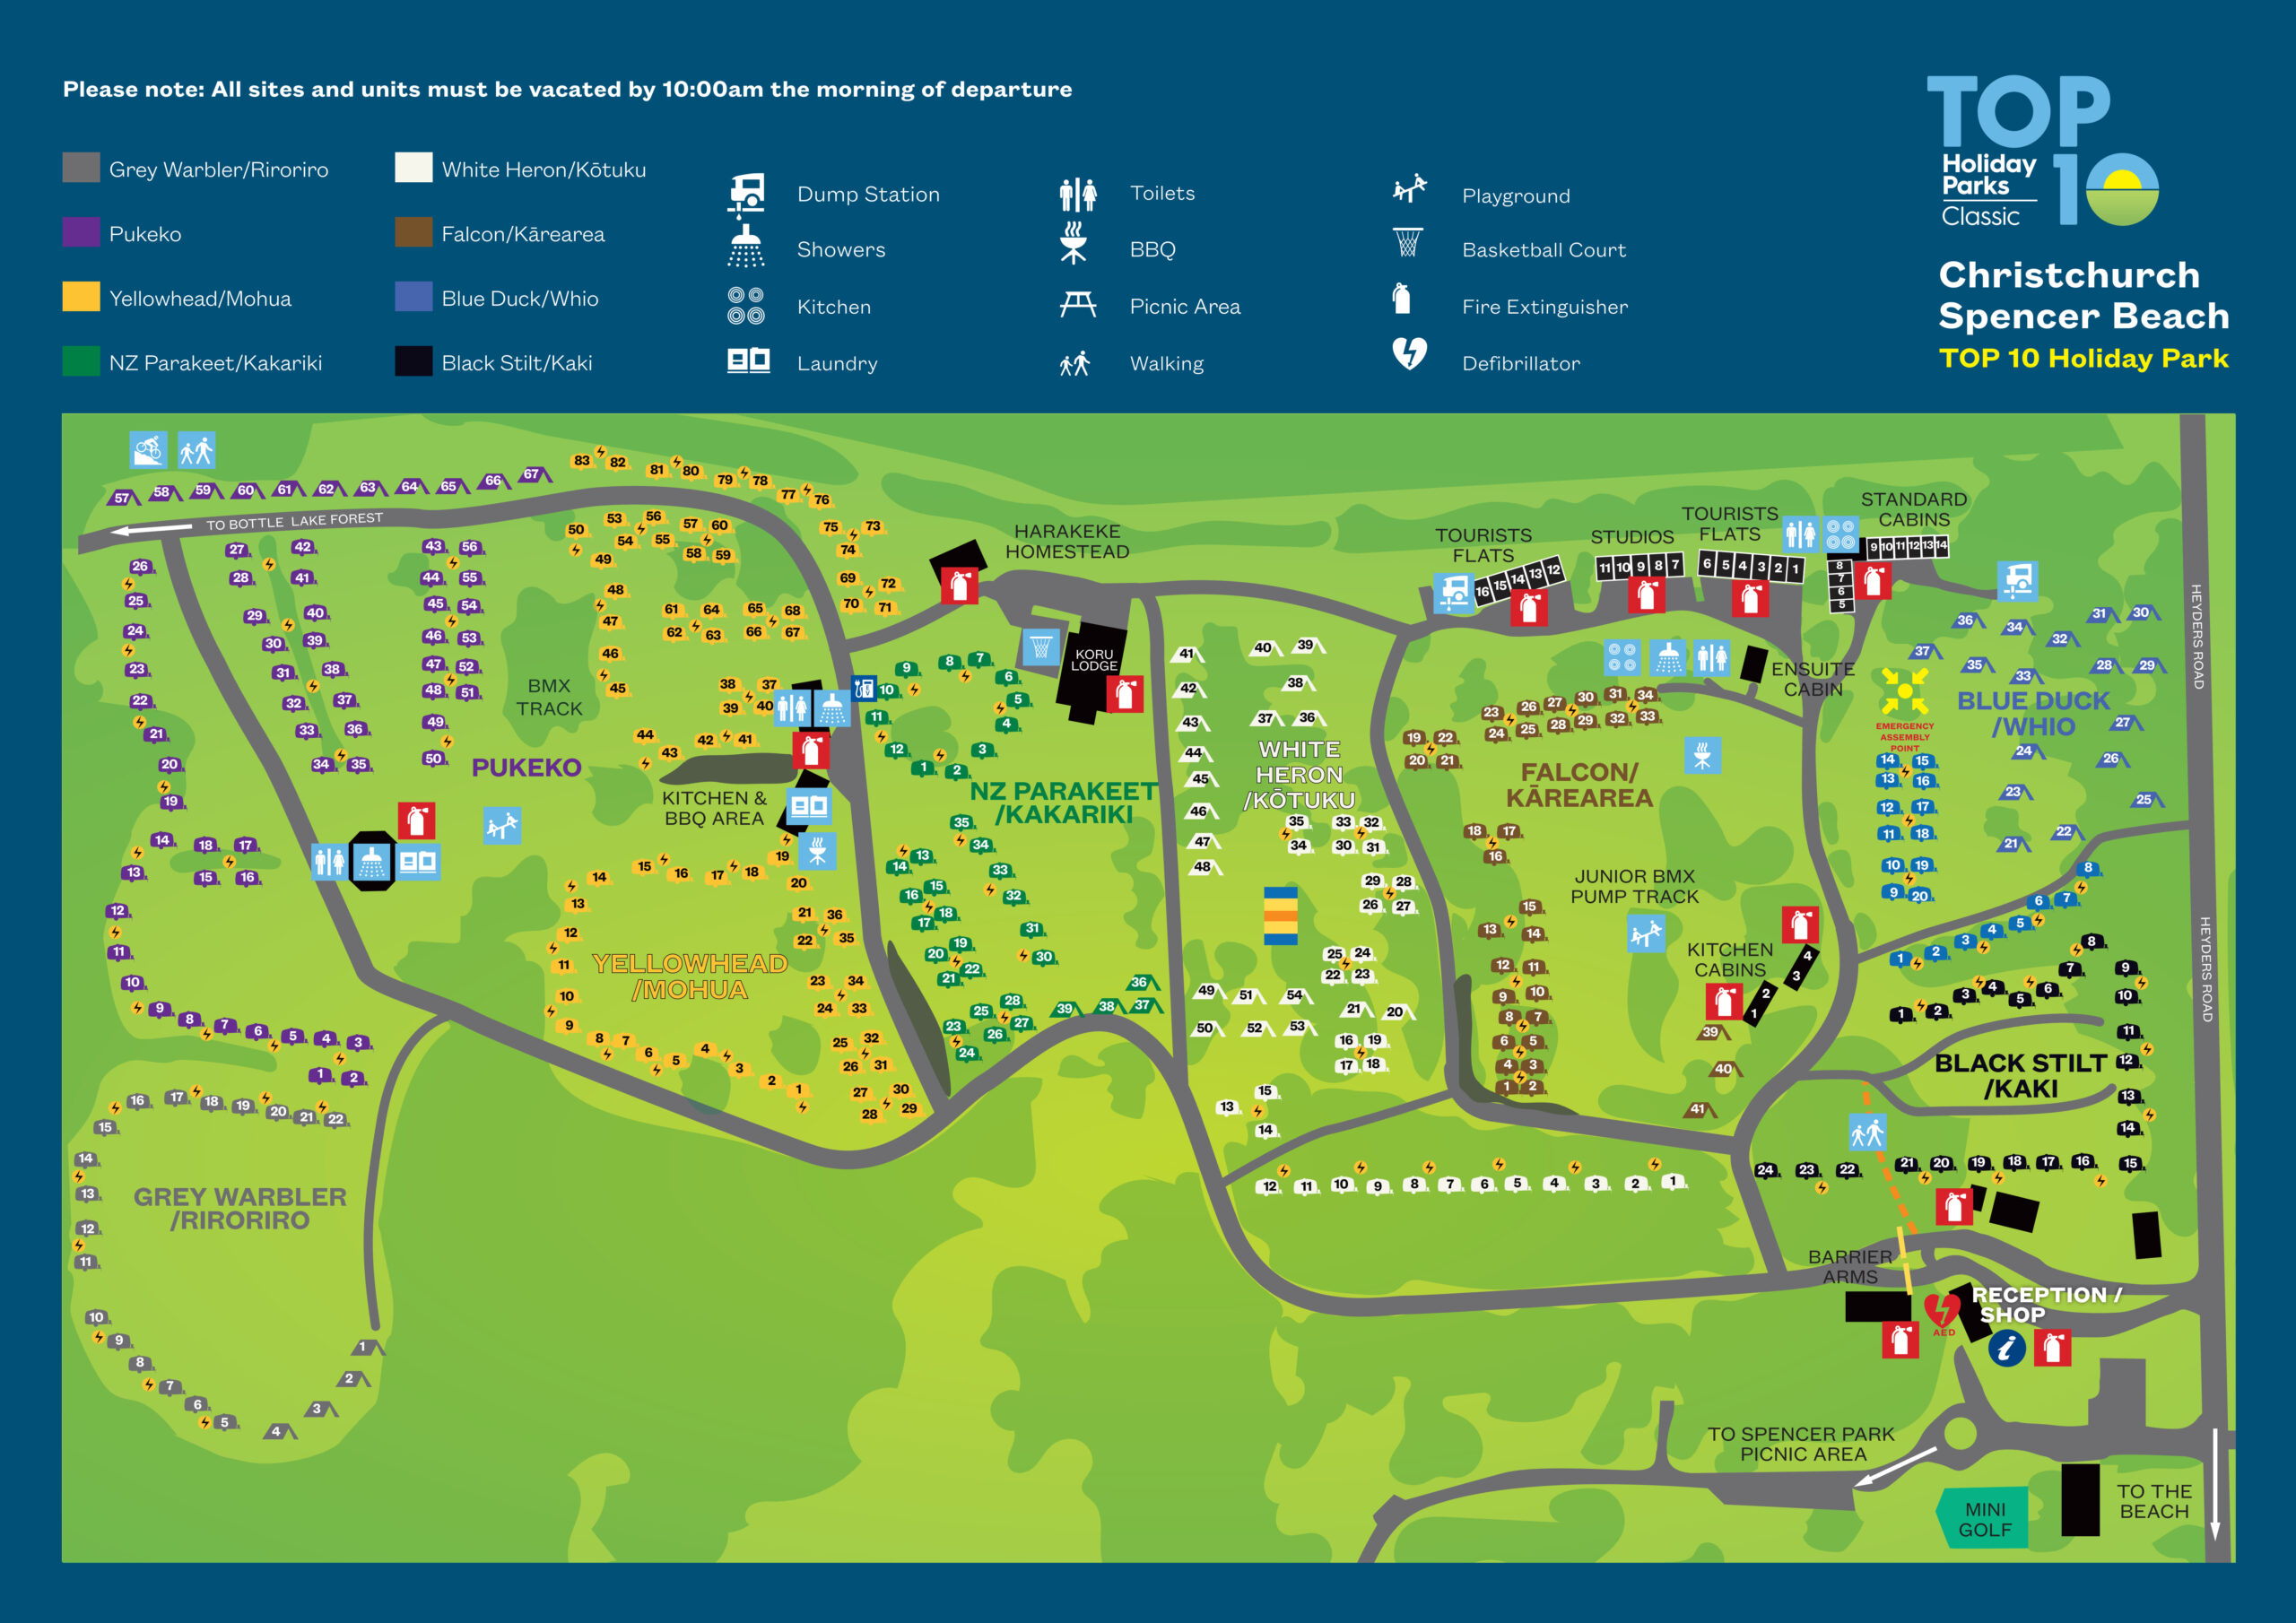 Site Map of Christchurch Spencer Beach TOP 10 Holiday Park